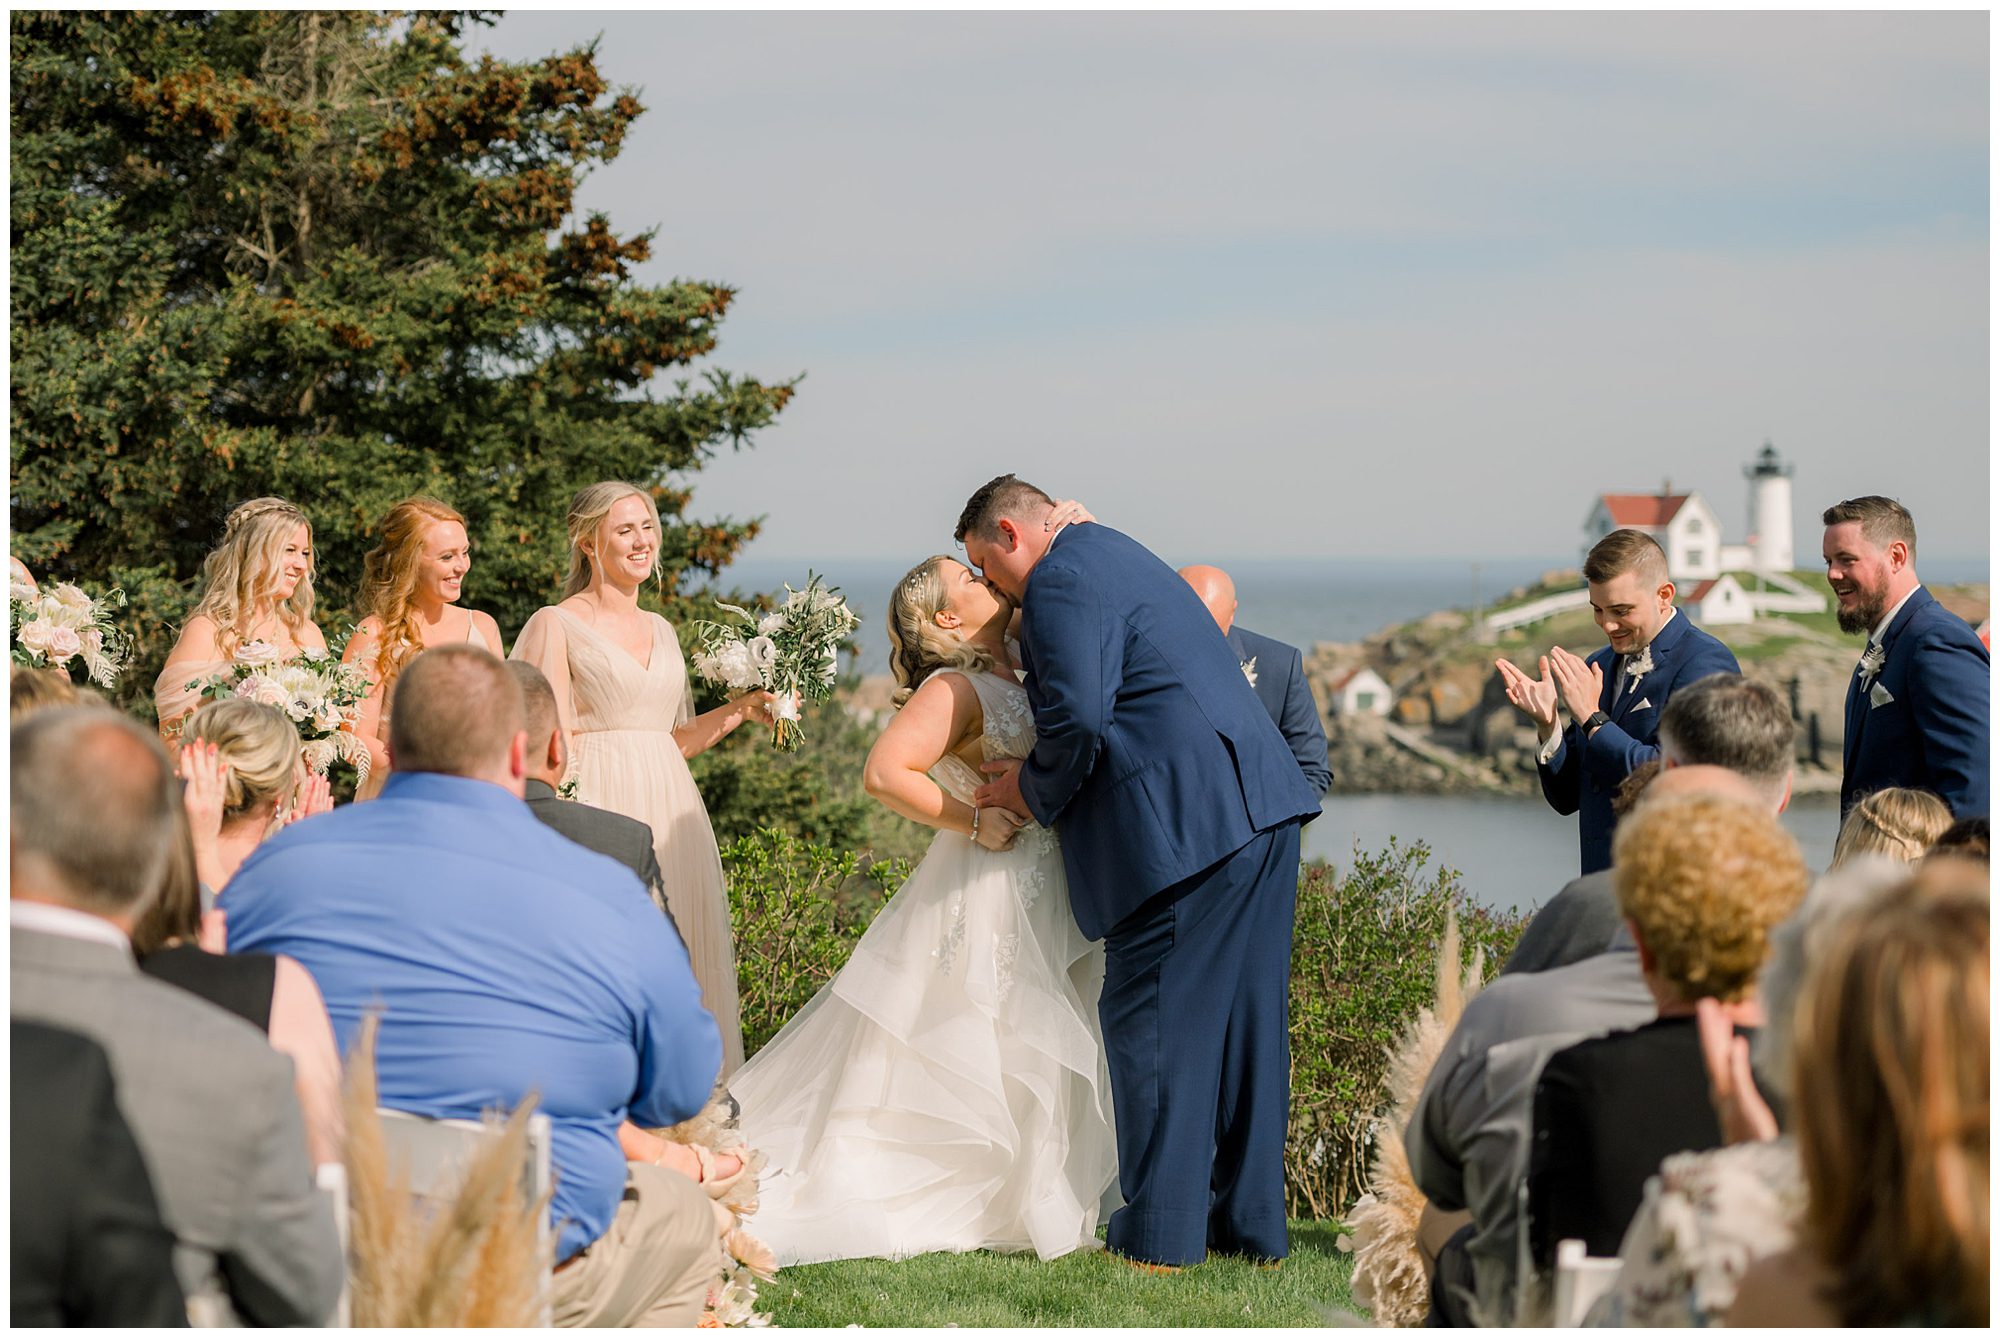 Groom kisses bride to celebrate their marriage at Viewpoint Hotel York Maine